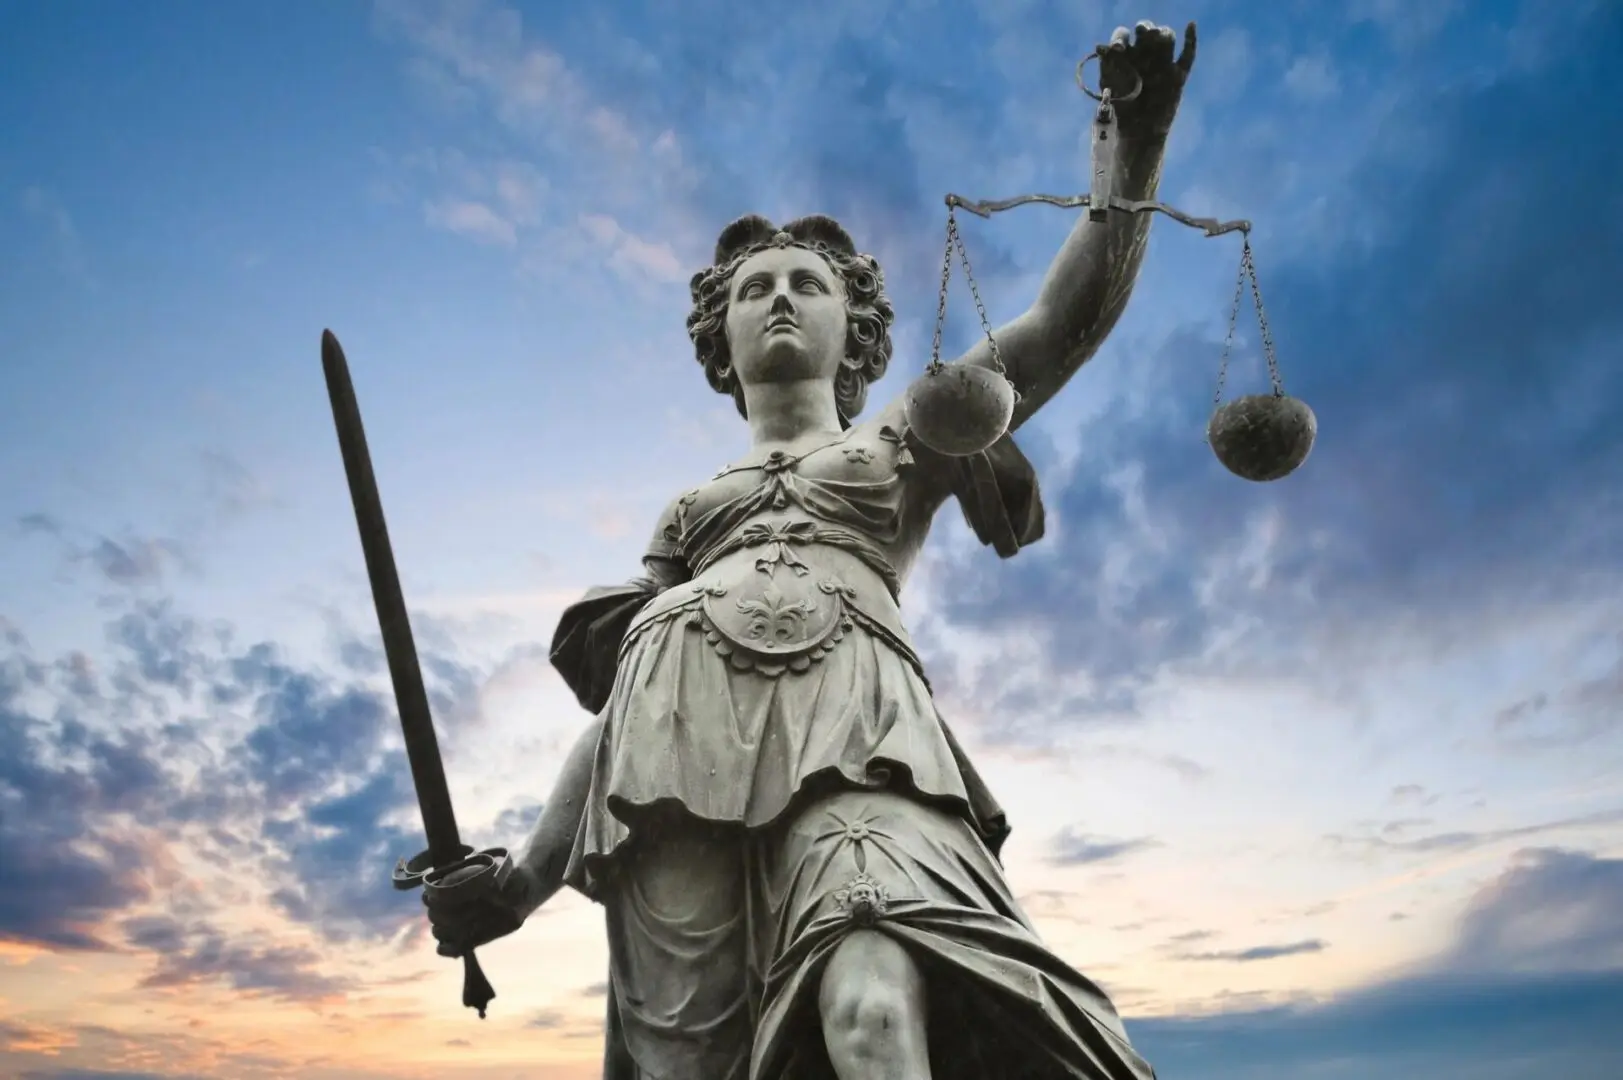 A statue of lady justice holding a sword and scales.